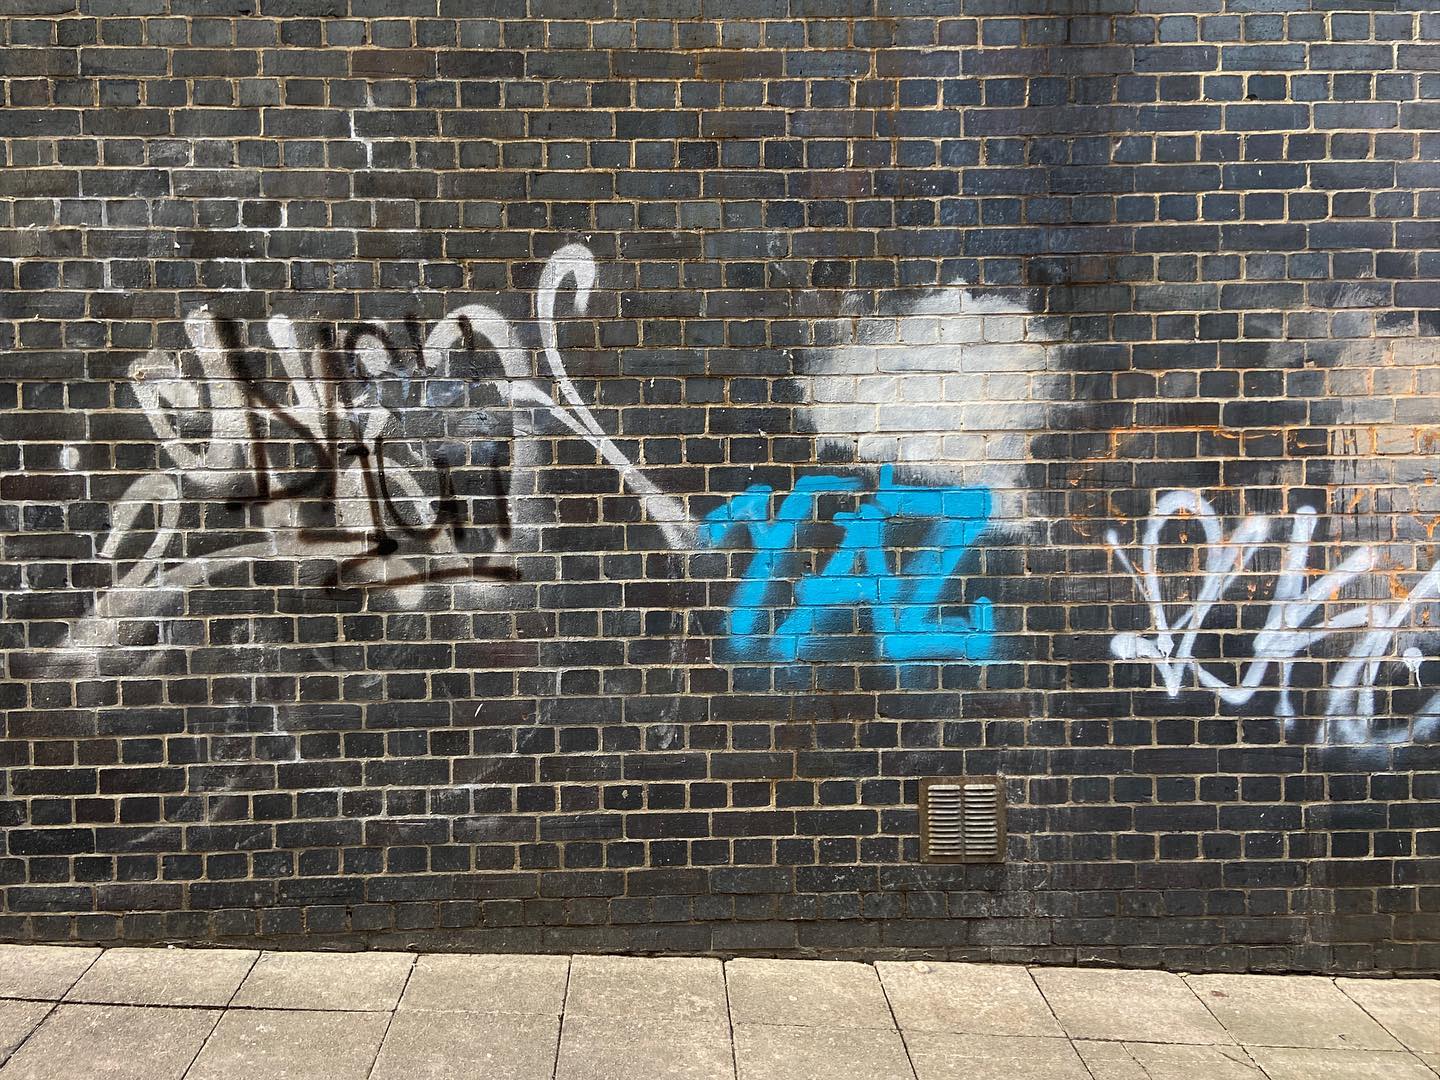 black brick with white mortar, clouded with tags on tags. light blue YAZ front and centre